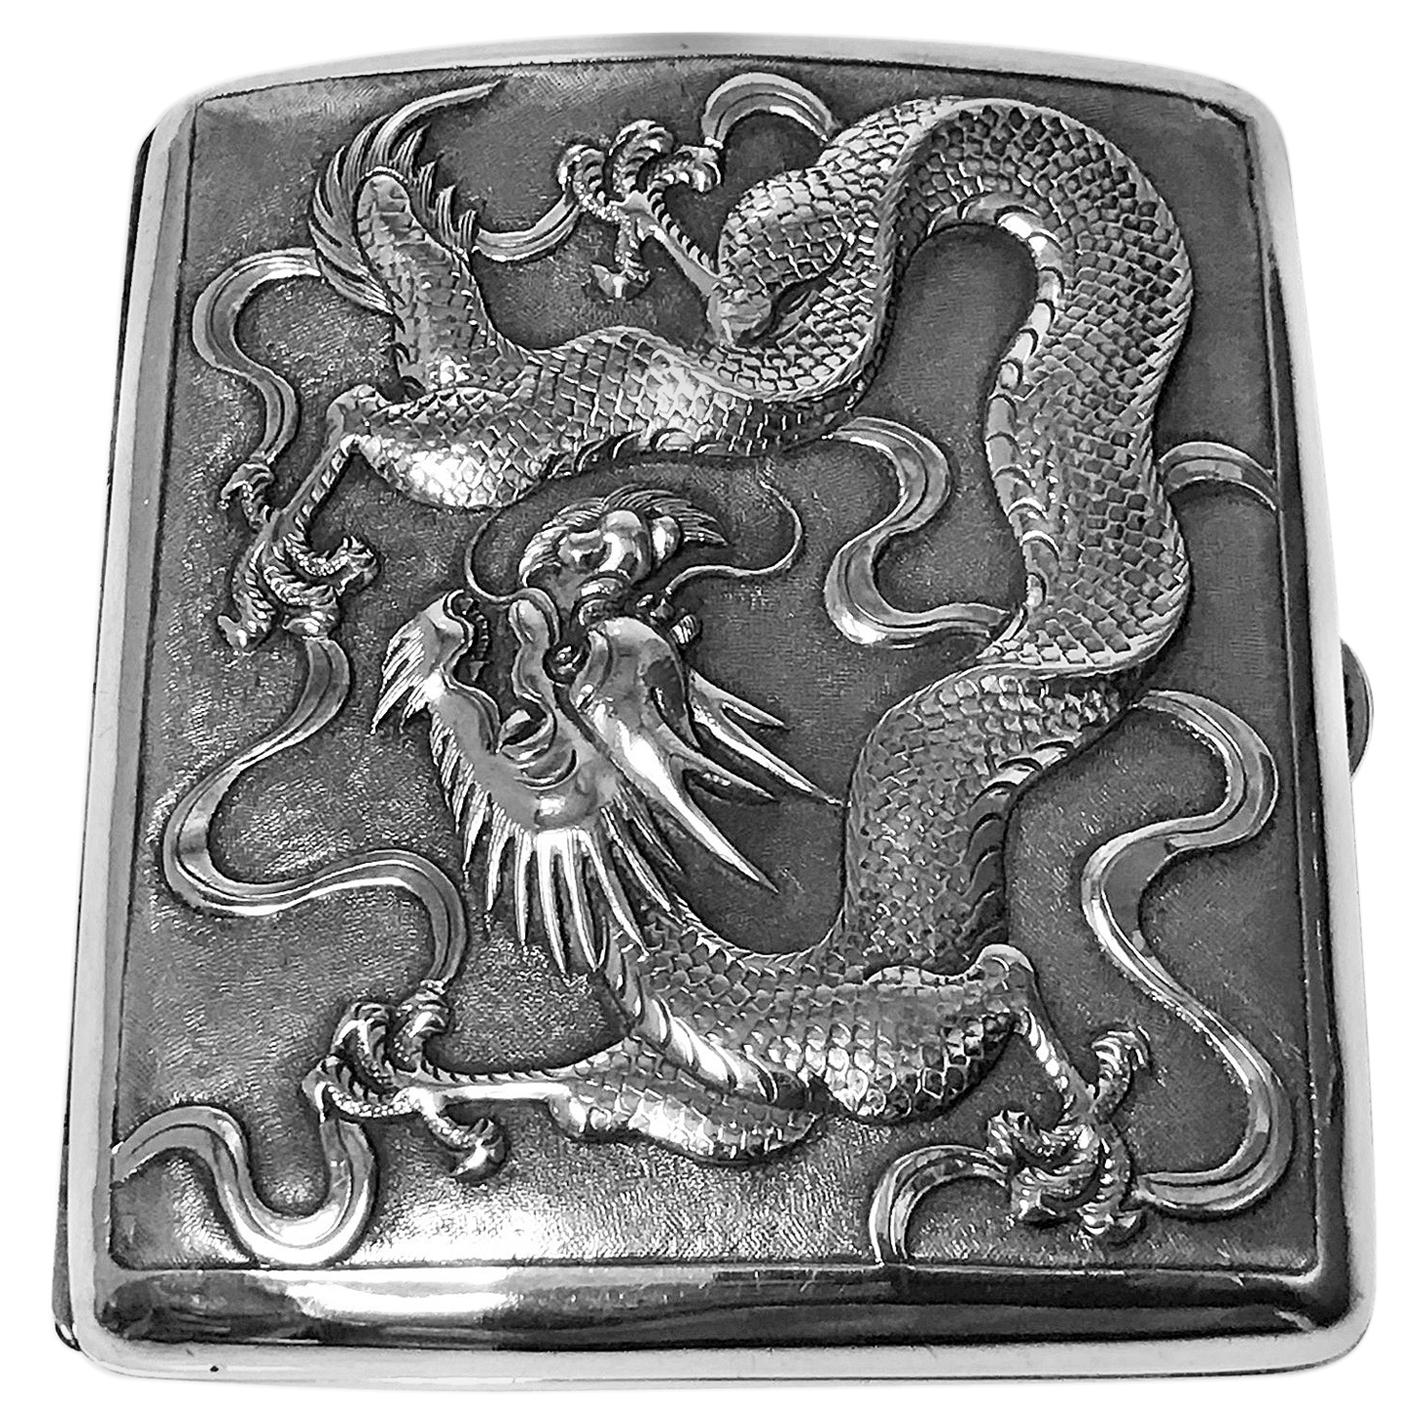 Antique Chinese Export Silver Cigarette Case, TC for Tuck Chang, circa 1900